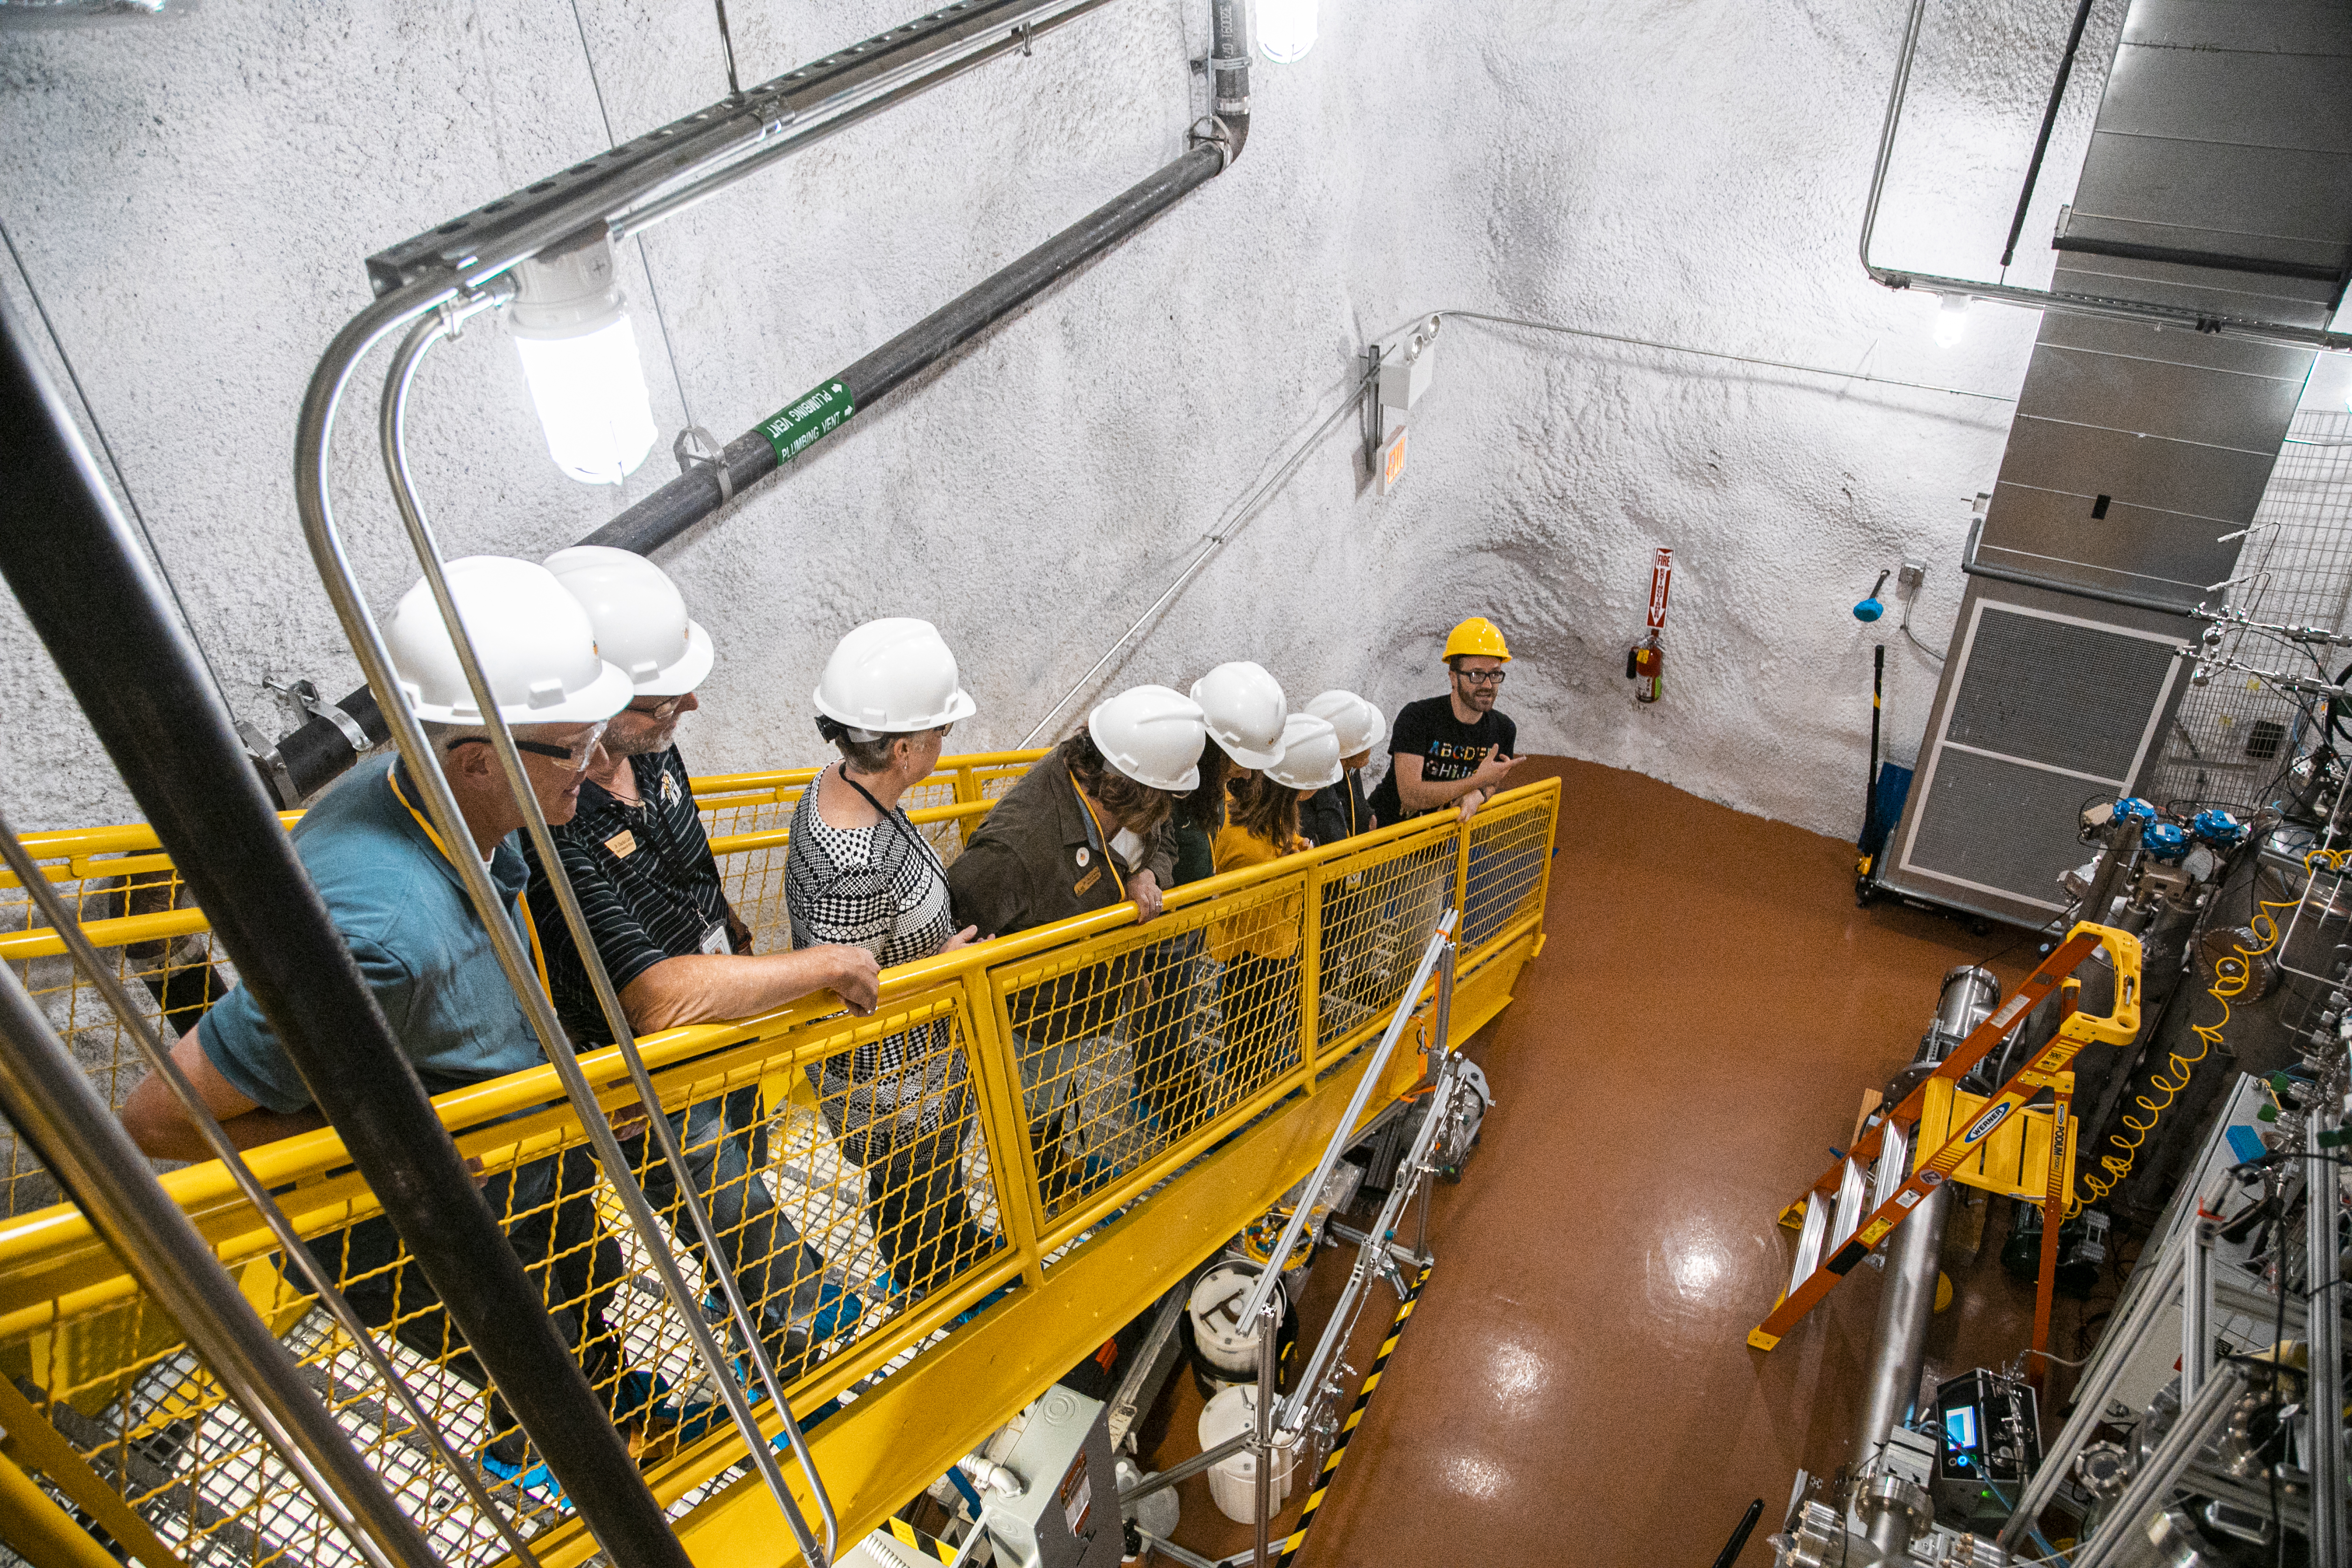 Group visits Davis Cavern, where the LUX-ZEPLIN dark matter experiment is being assembled.